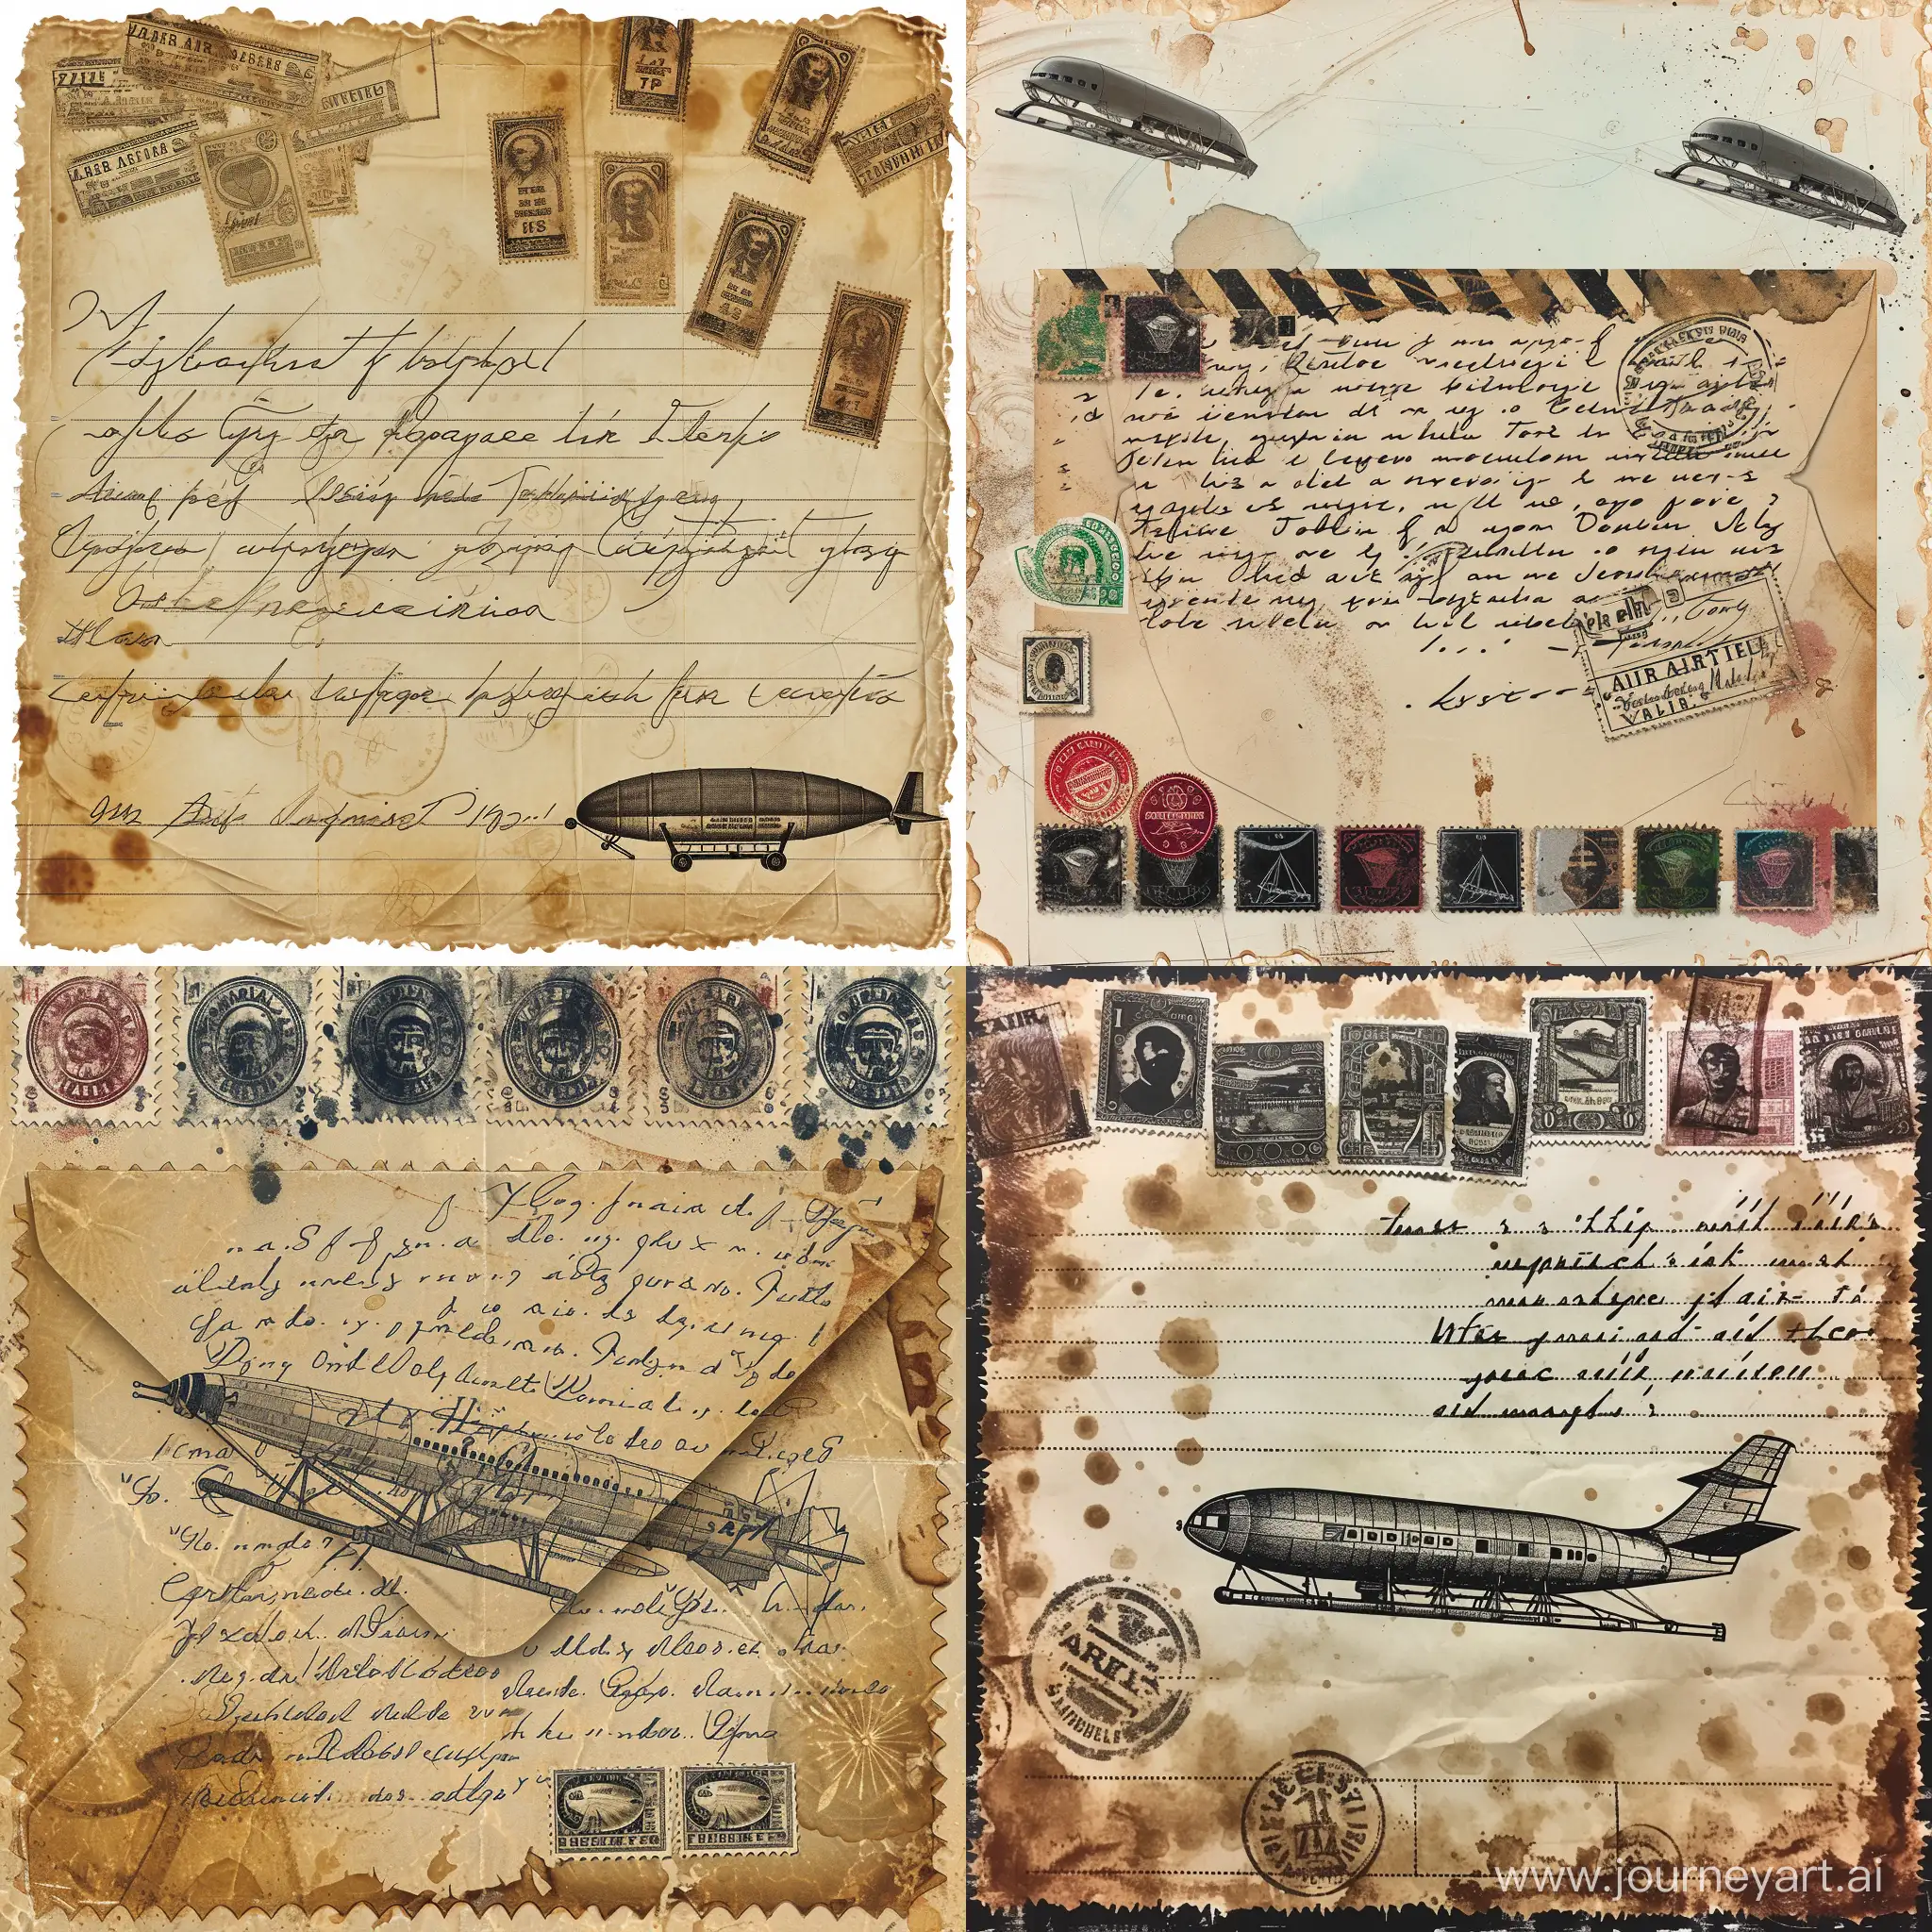 Nostalgic-Air-Mail-Envelope-with-Handwritten-Text-and-Zeppelin-Stamps